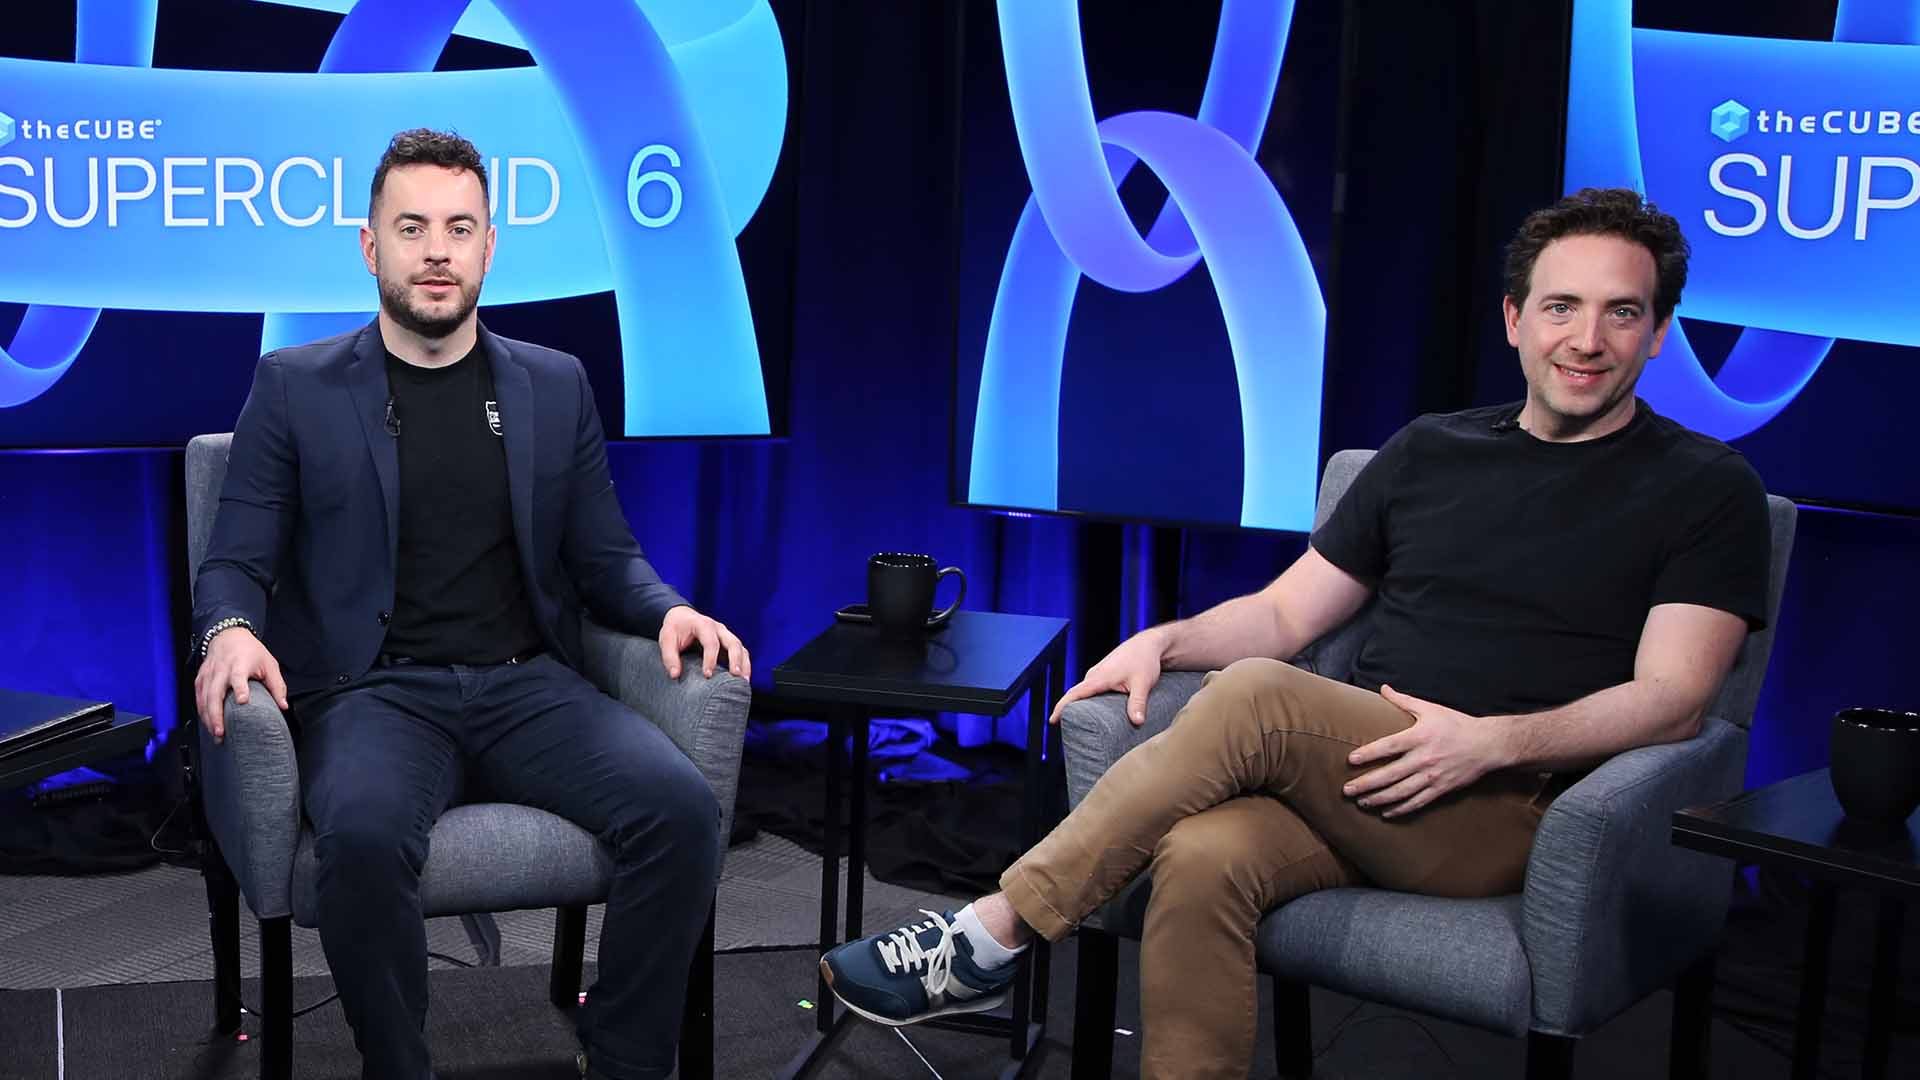 Massi Genta, founder and chief executive officer of Metabob, and Eli Schleifer, founder and chief executive officer of Trunk Technologies Inc, discuss AI for developer tools